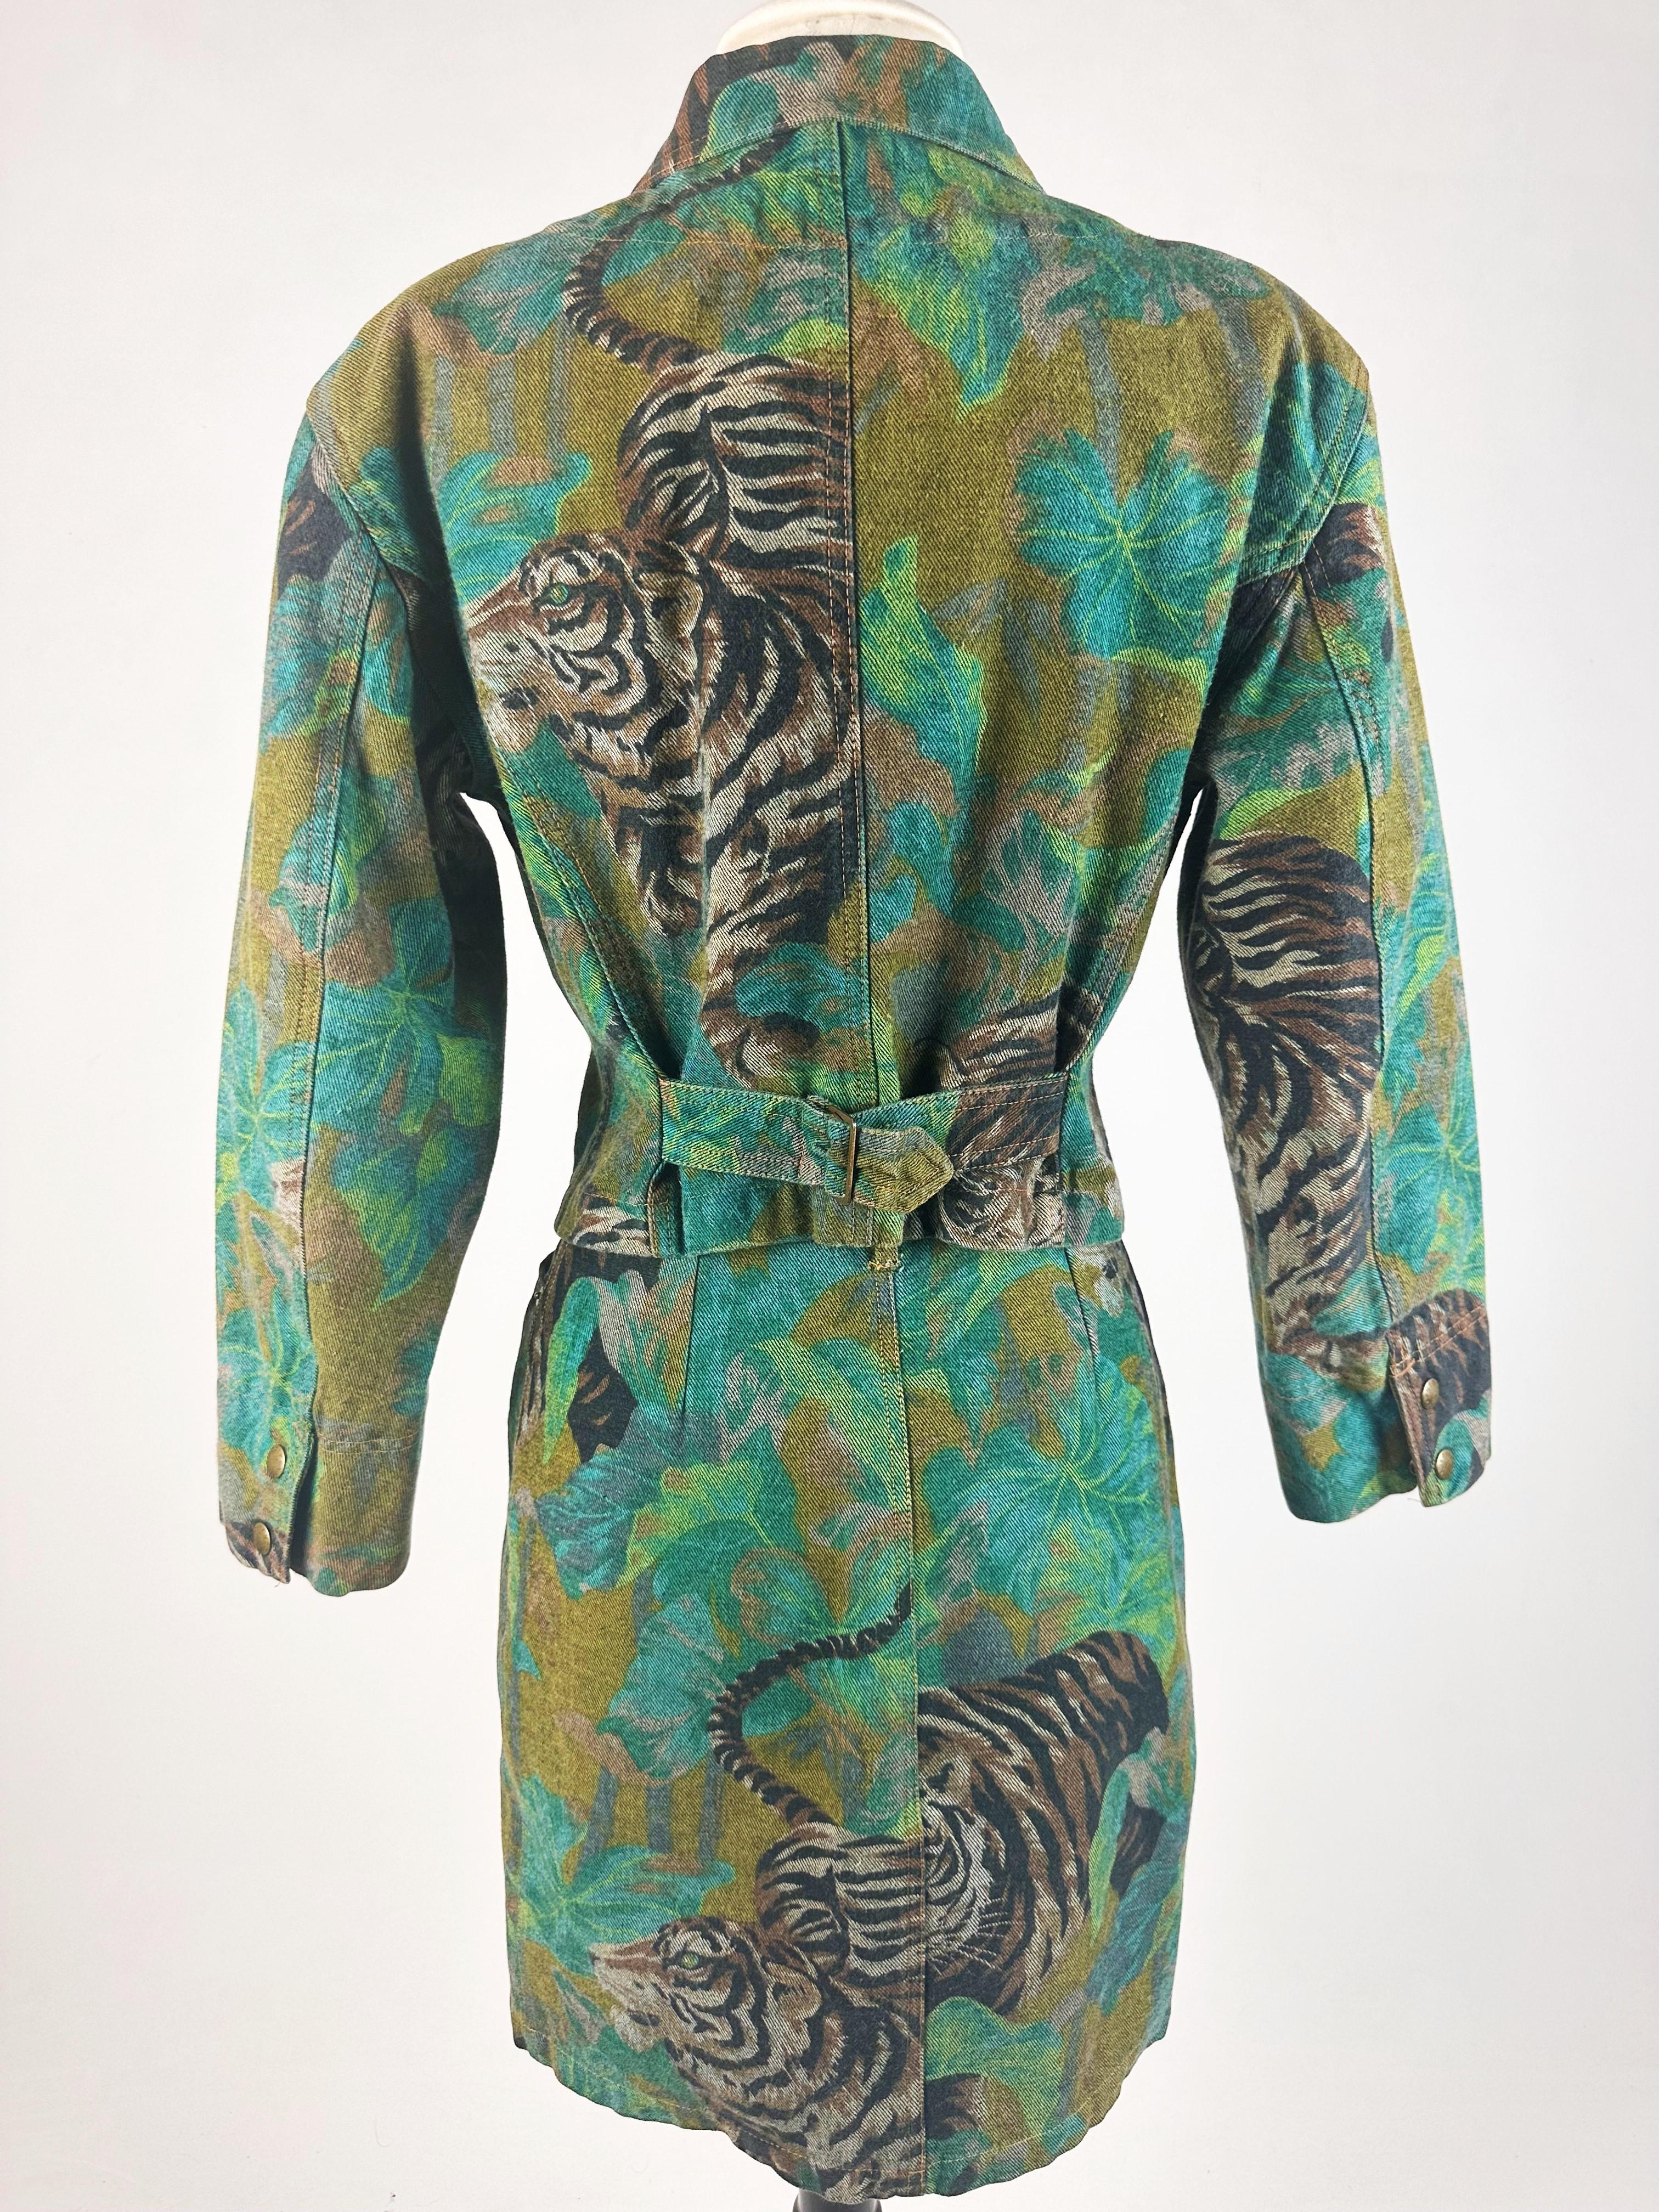 Jacket and Skirt by Kenzo Takada, Jungle & Tiger Print on Denim - French C. 1990 For Sale 6